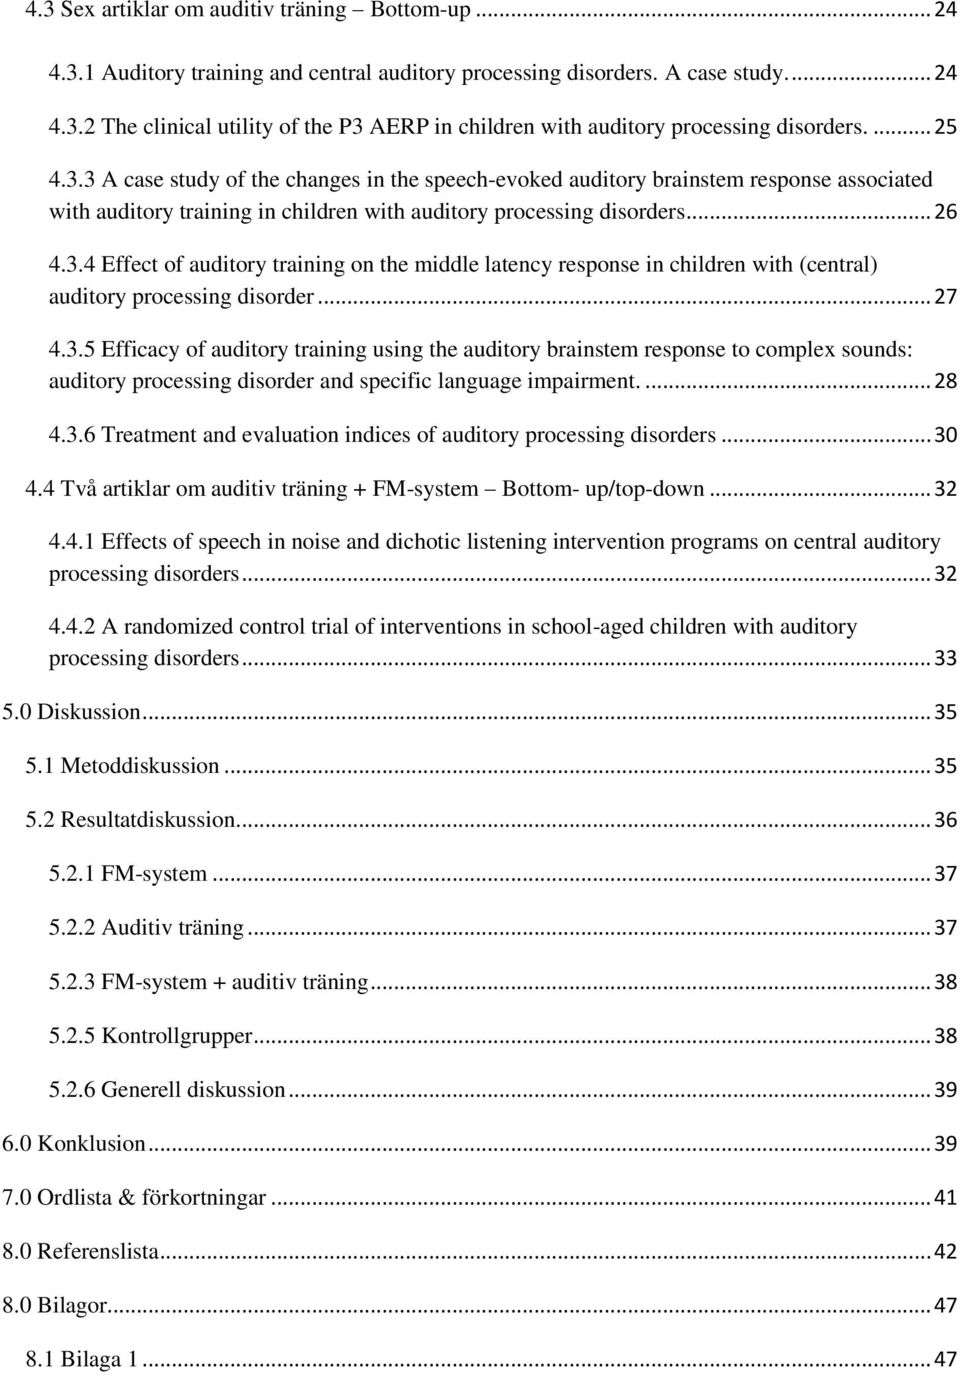 .. 27 4.3.5 Efficacy of auditory training using the auditory brainstem response to complex sounds: auditory processing disorder and specific language impairment.... 28 4.3.6 Treatment and evaluation indices of auditory processing disorders.